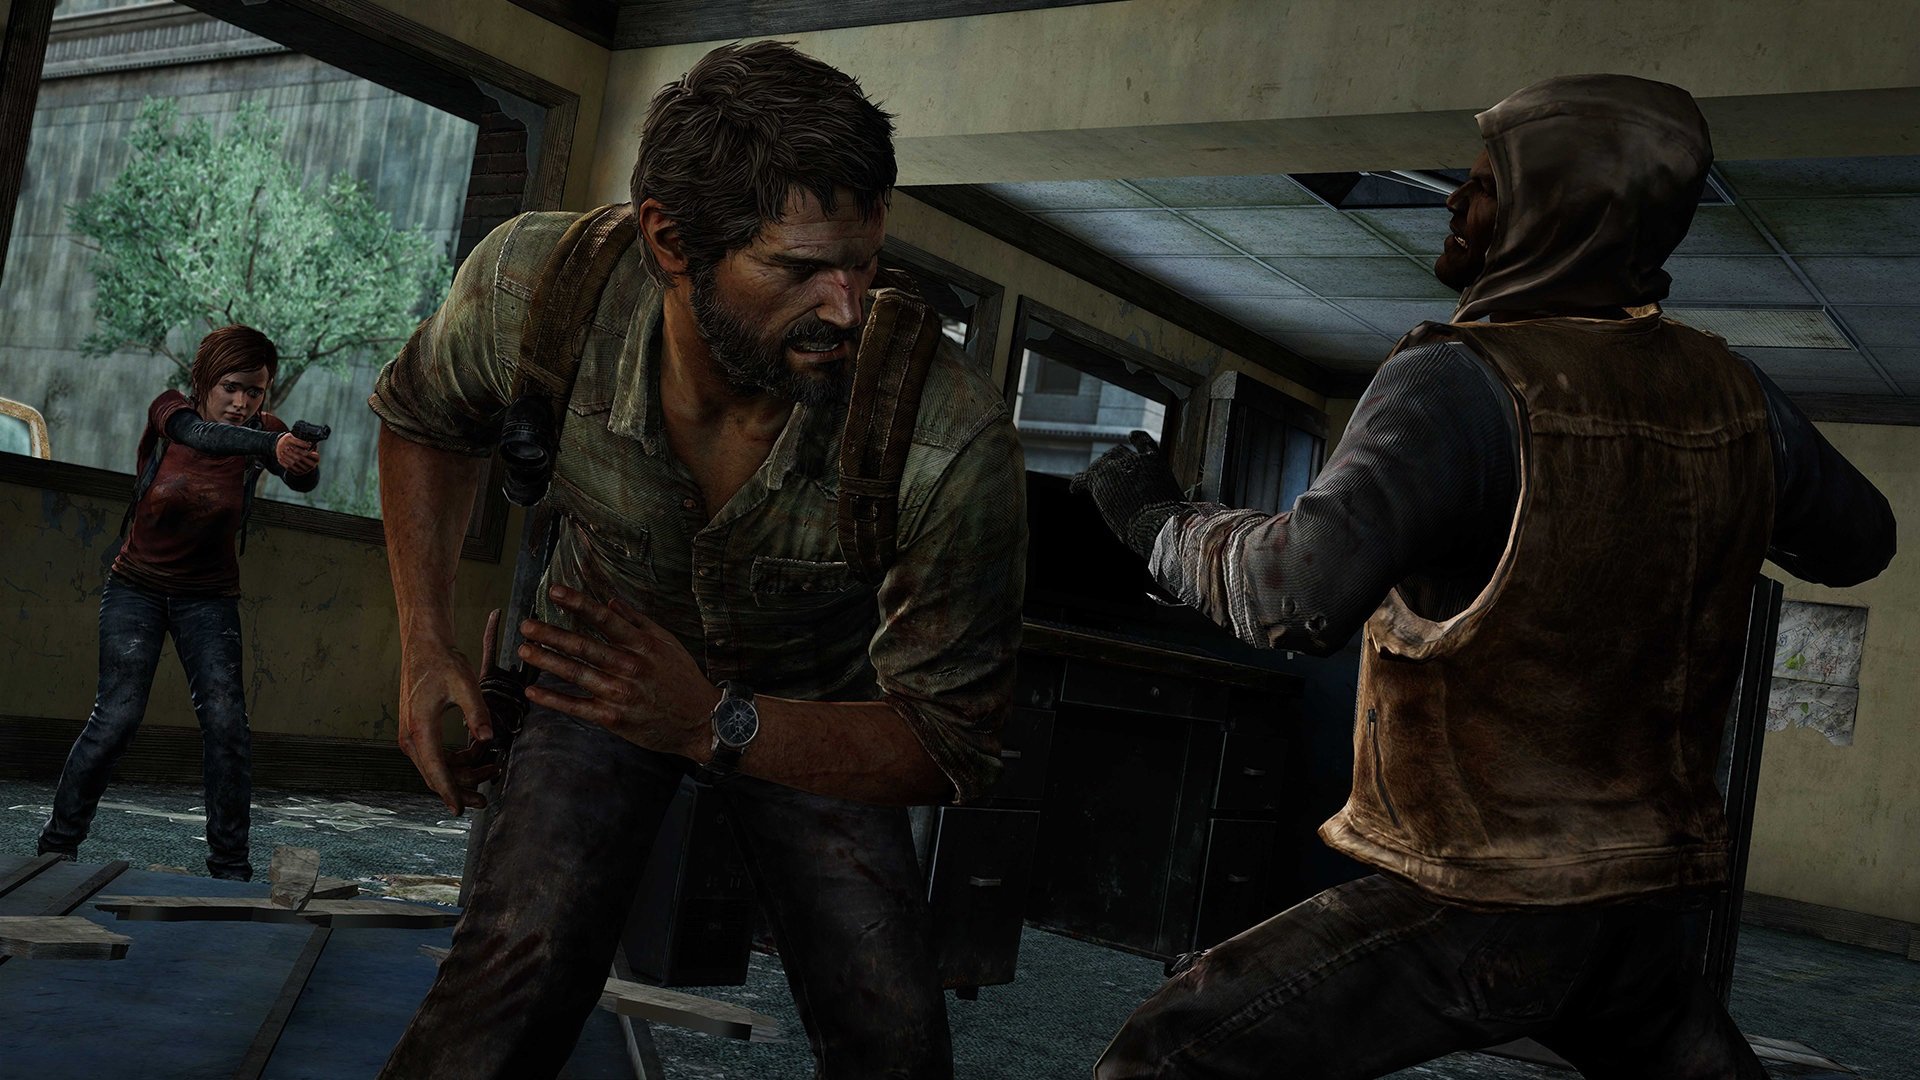 The Last of Us remake is coming to PS5 this year, PC in development